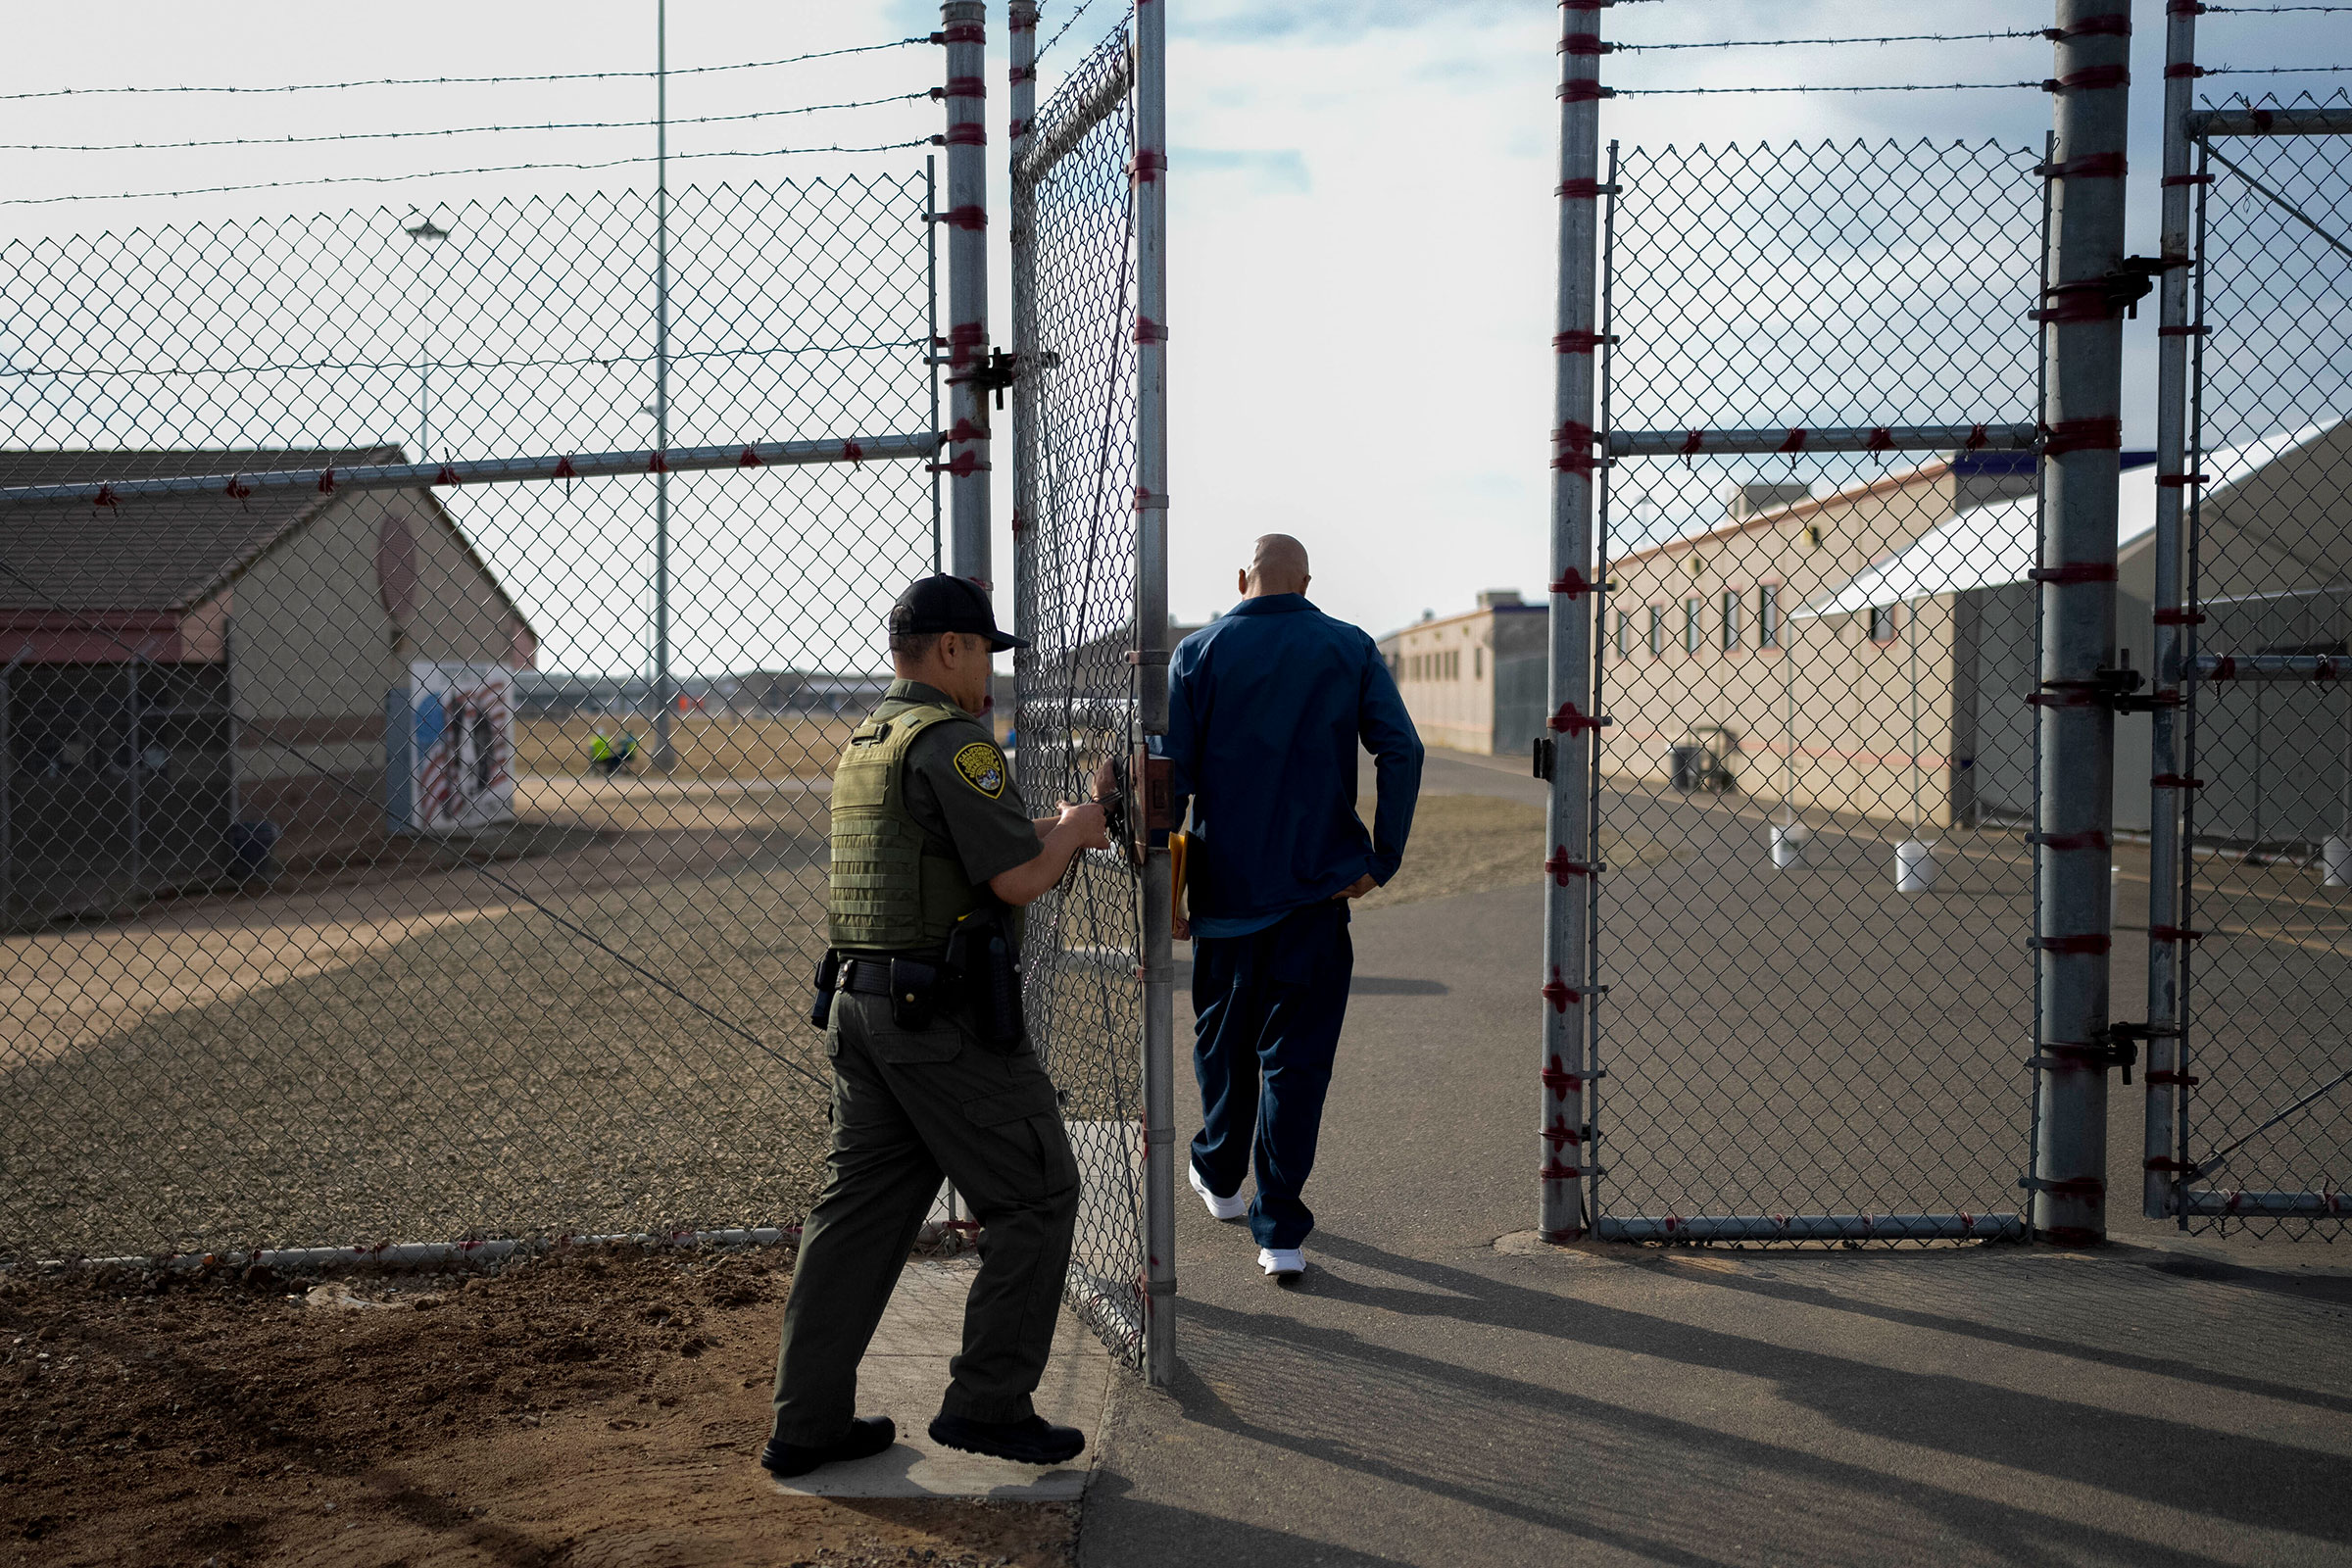 Officer Jimmy Bliatout closes a gate after a prisoner enters the yard at Valley State Prison in Chowchilla, Calif., Friday, Nov. 4, 2022. (Jae C. Hong—AP)